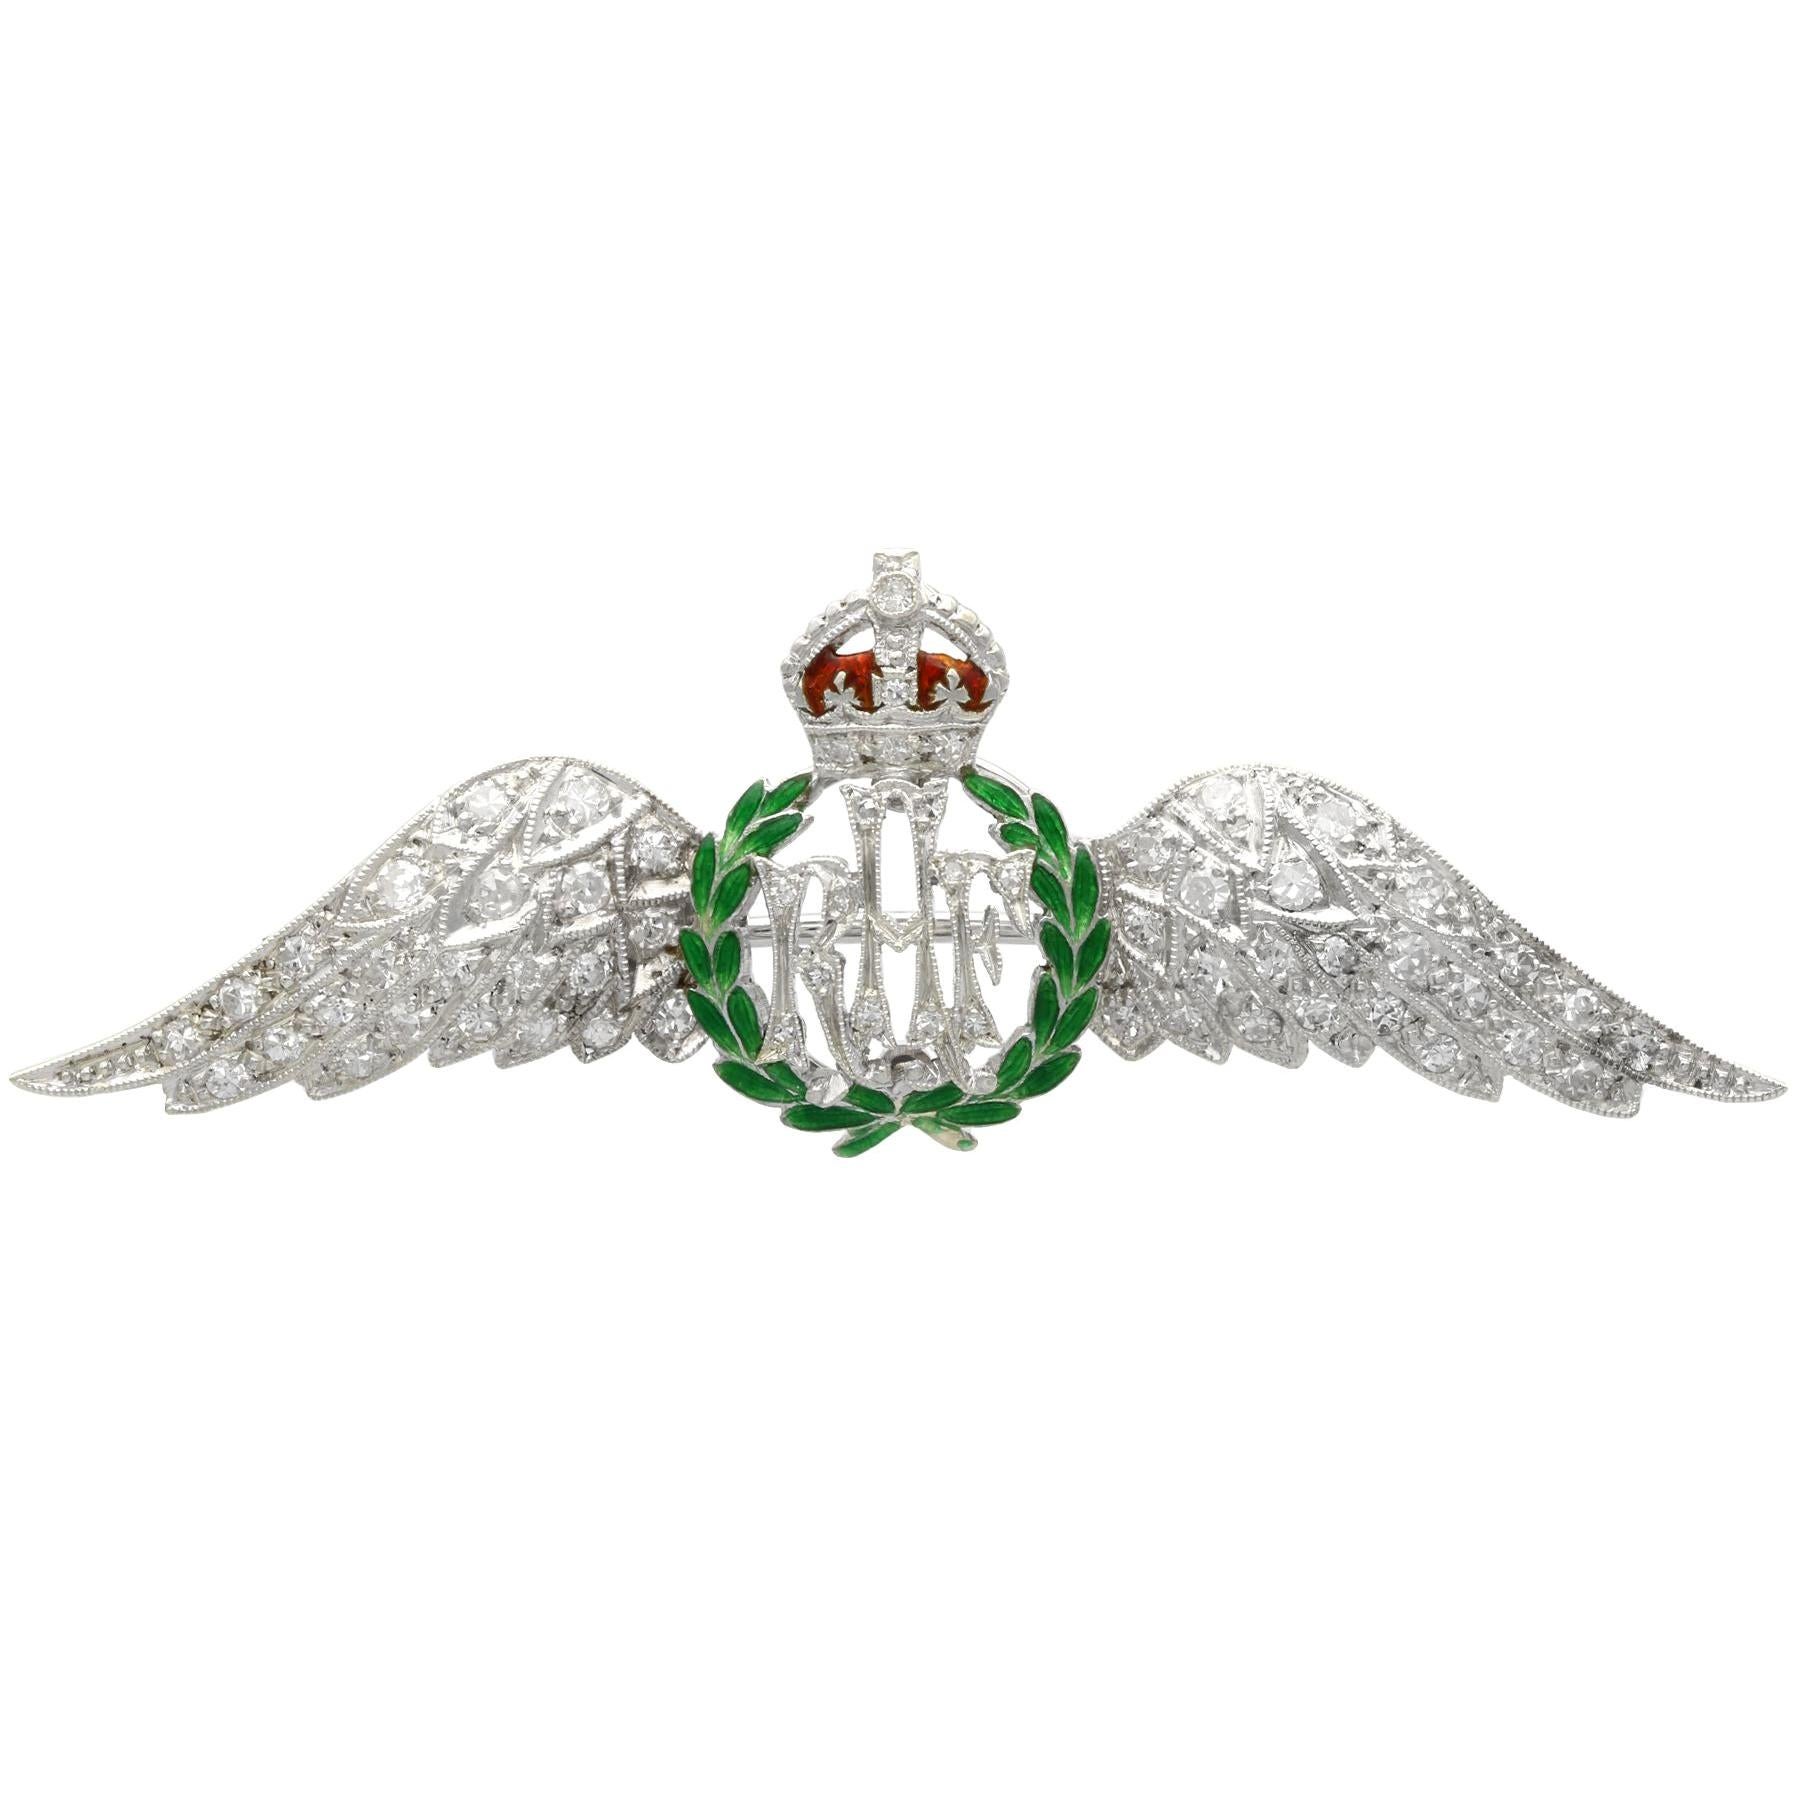 1935 Antique Diamond and Enamel White Gold RAF Sweetheart Brooch